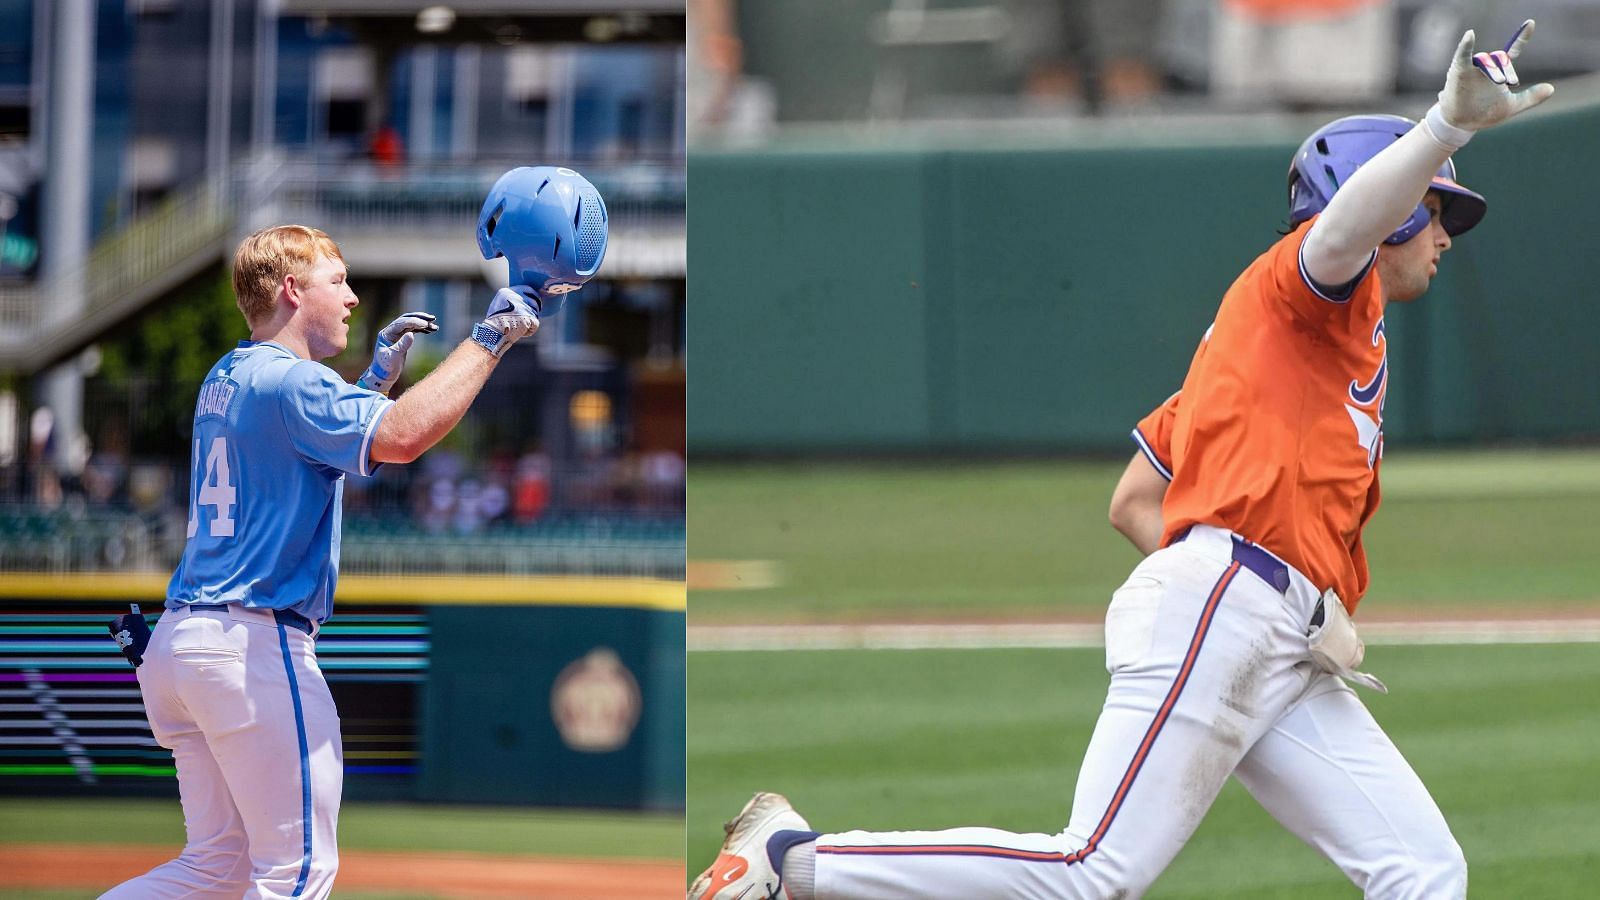 North Carolina and Parks Harber and Clemson with Blake Wright will be two ACC teams to watch.